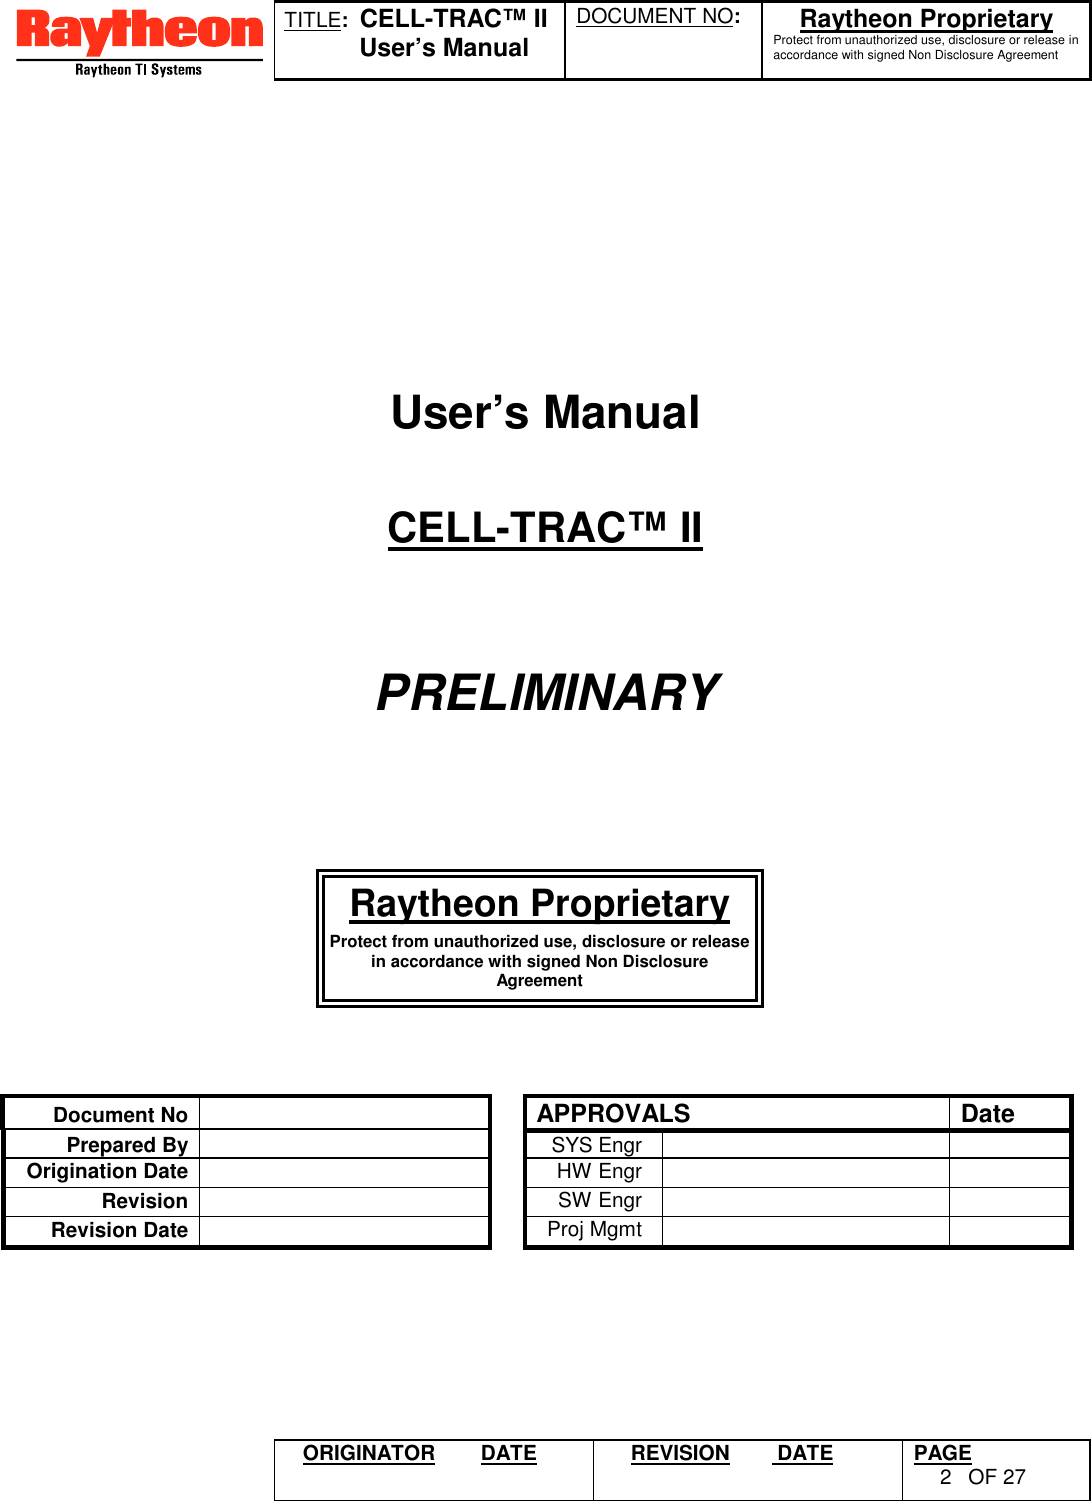 TITLE:  CELL-TRAC™ IIUser’s ManualDOCUMENT NO: Raytheon ProprietaryProtect from unauthorized use, disclosure or release inaccordance with signed Non Disclosure AgreementORIGINATOR DATE REVISION  DATE PAGE2OF 27User’s ManualCELL-TRAC™ IIPRELIMINARYDocument No APPROVALS DatePrepared By SYS Engr Origination Date HW EngrRevision SW EngrRevision Date Proj MgmtRaytheon ProprietaryProtect from unauthorized use, disclosure or releasein accordance with signed Non DisclosureAgreement